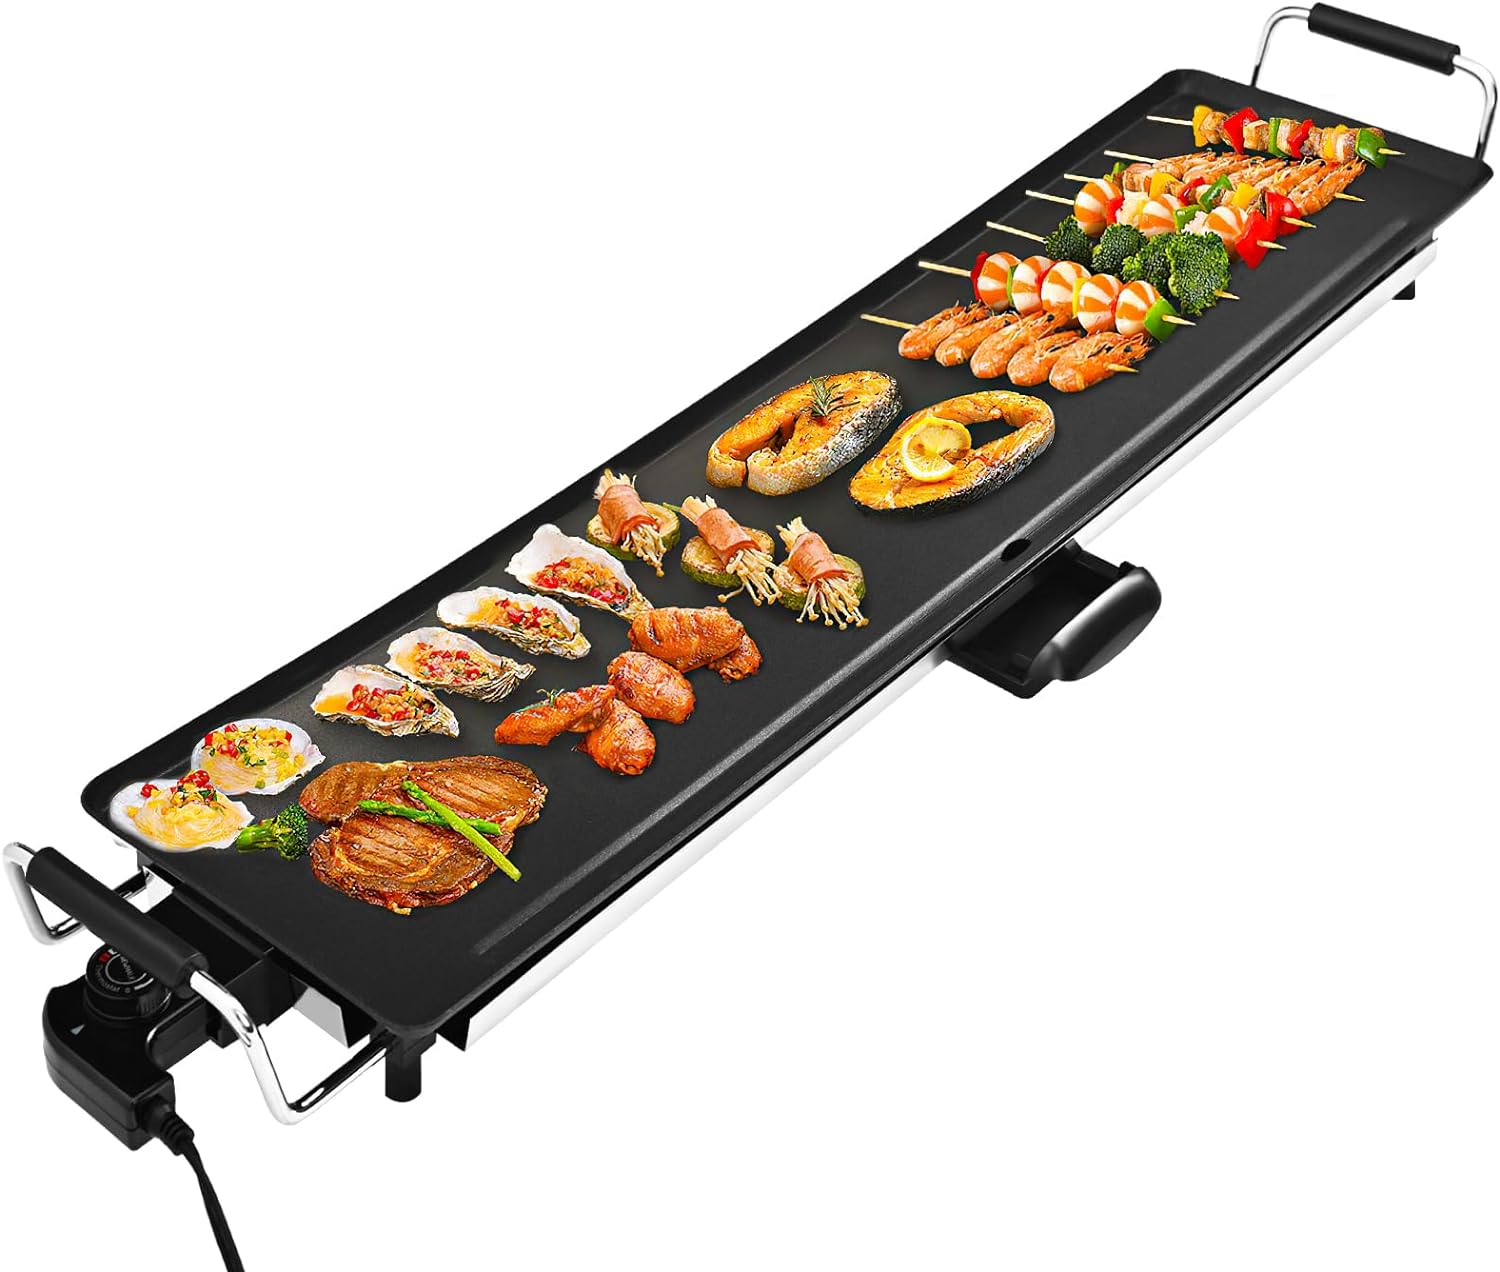 AEWHALE Electric Nonstick Extra Larger Griddle Grill-35 Teppanyaki Grill BBQ with Adjustable Temperature Insulated Handles for Indoor/Outdoor